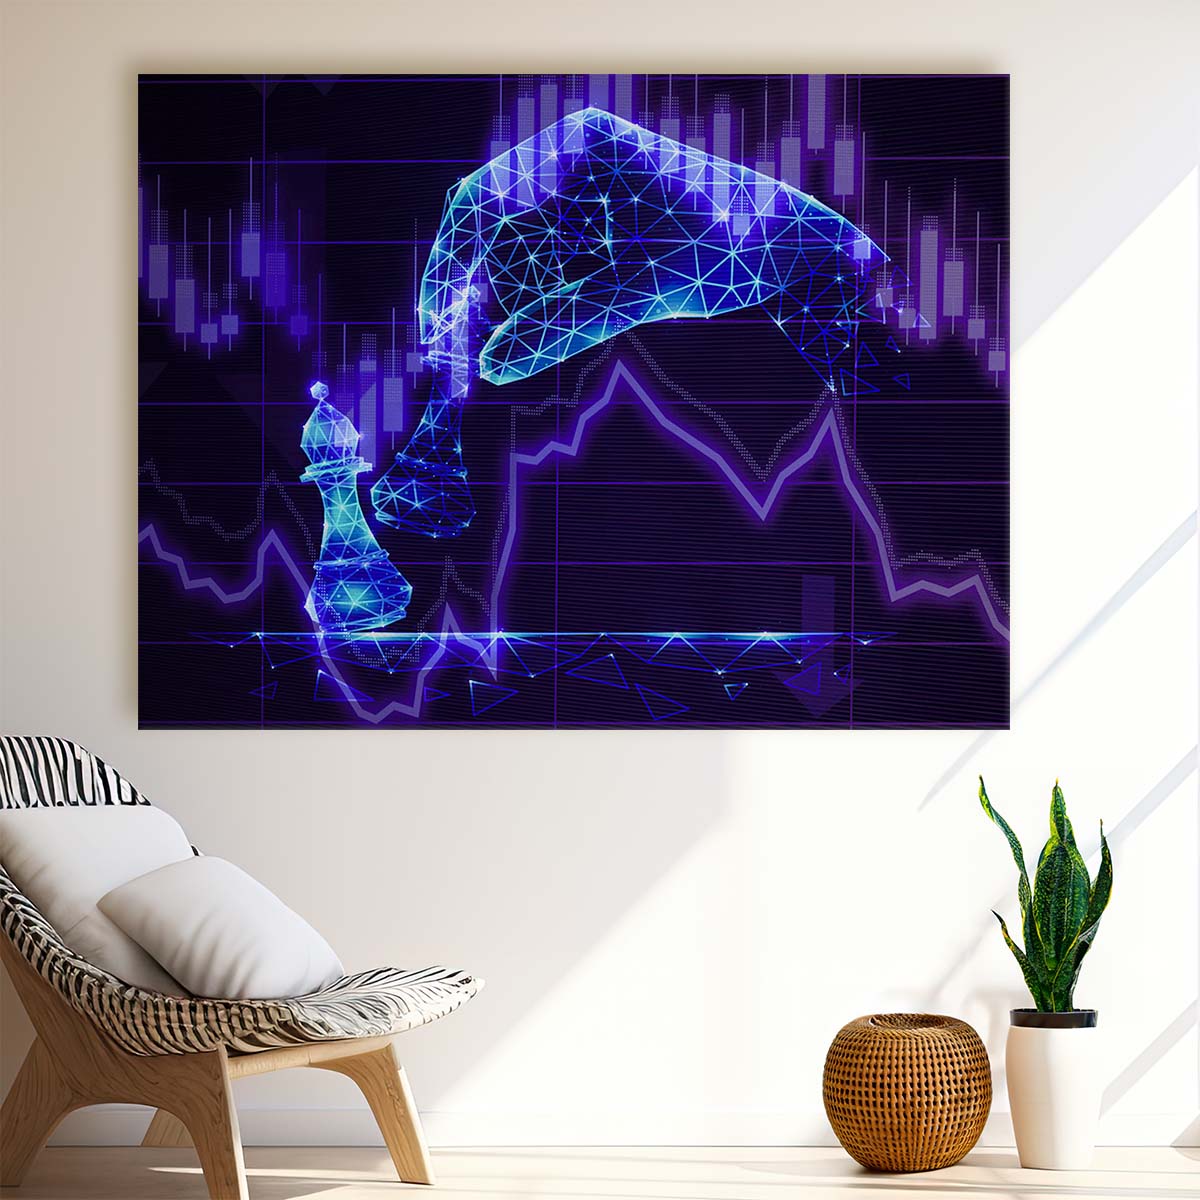 Stock Market Trading Strategy Wall Art by Luxuriance Designs. Made in USA.